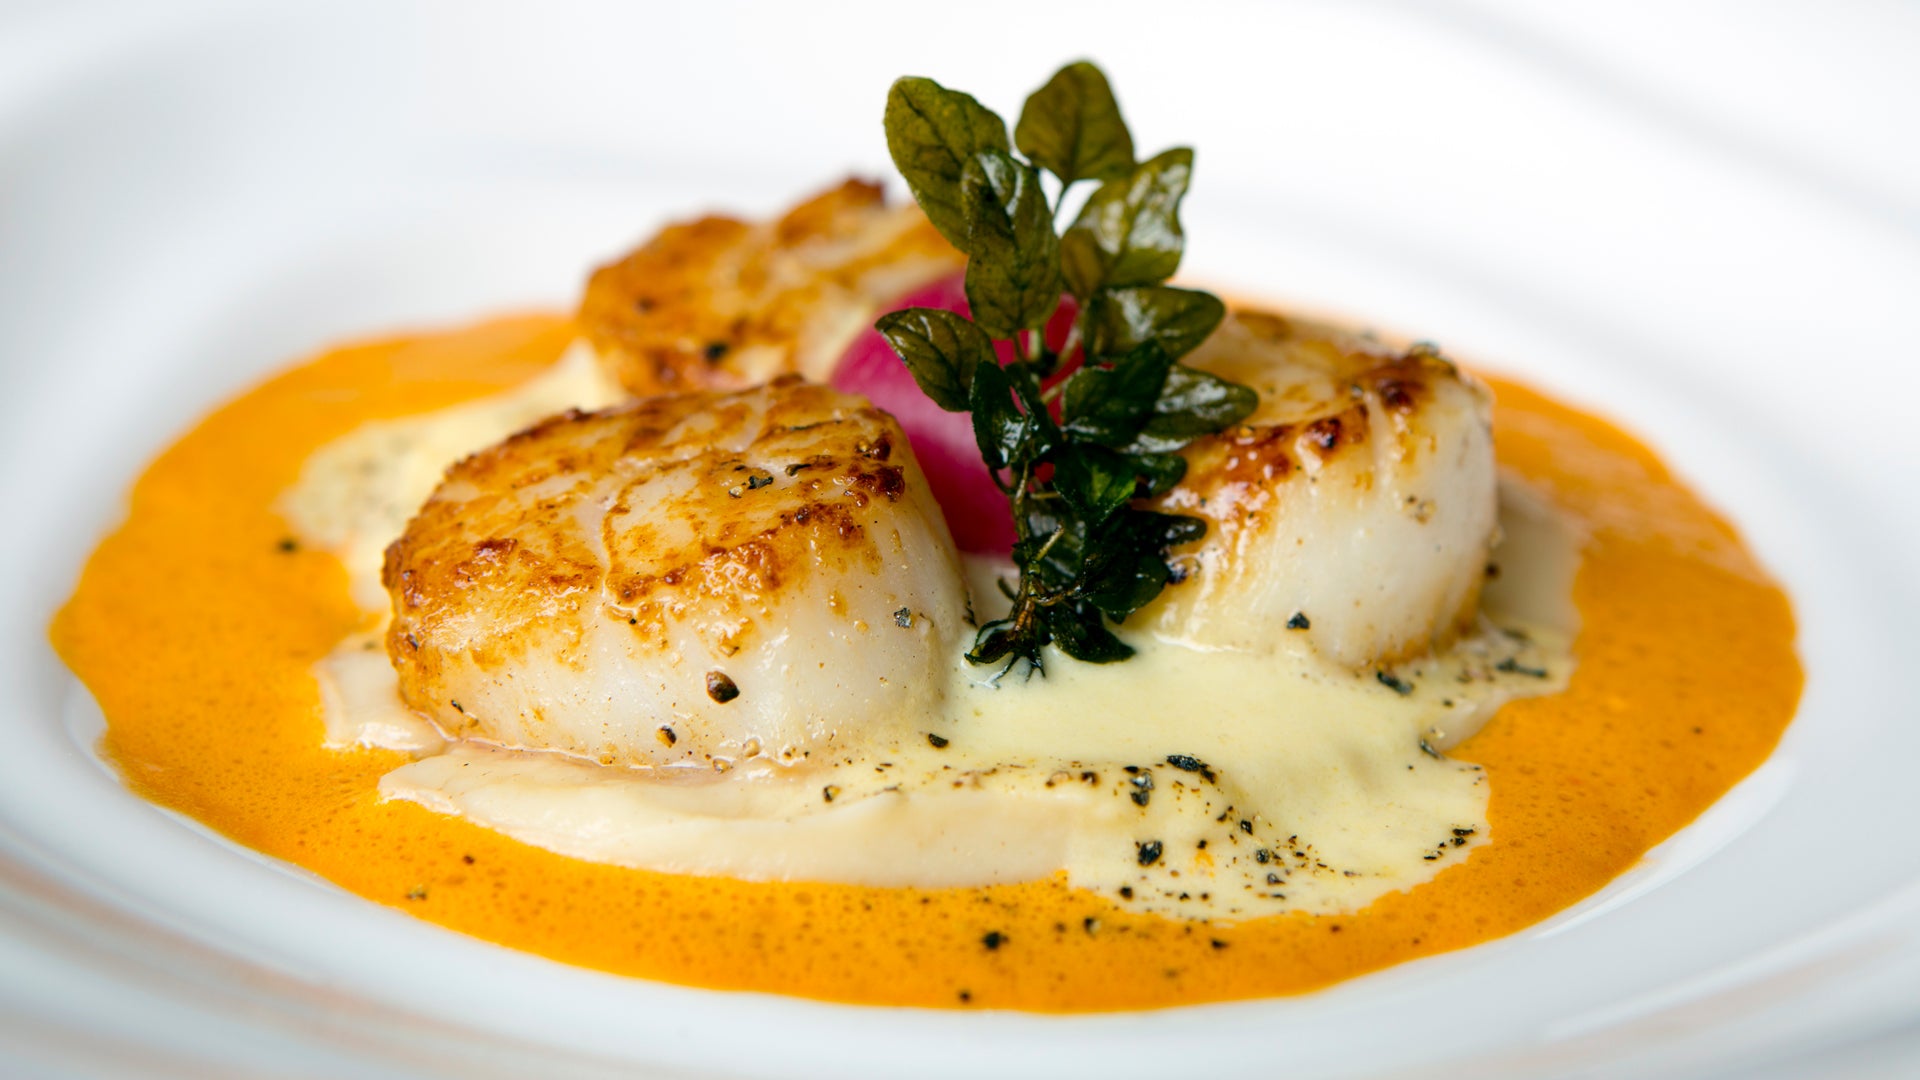 Seared Scallops With Hot Sauce Beurre Blanc